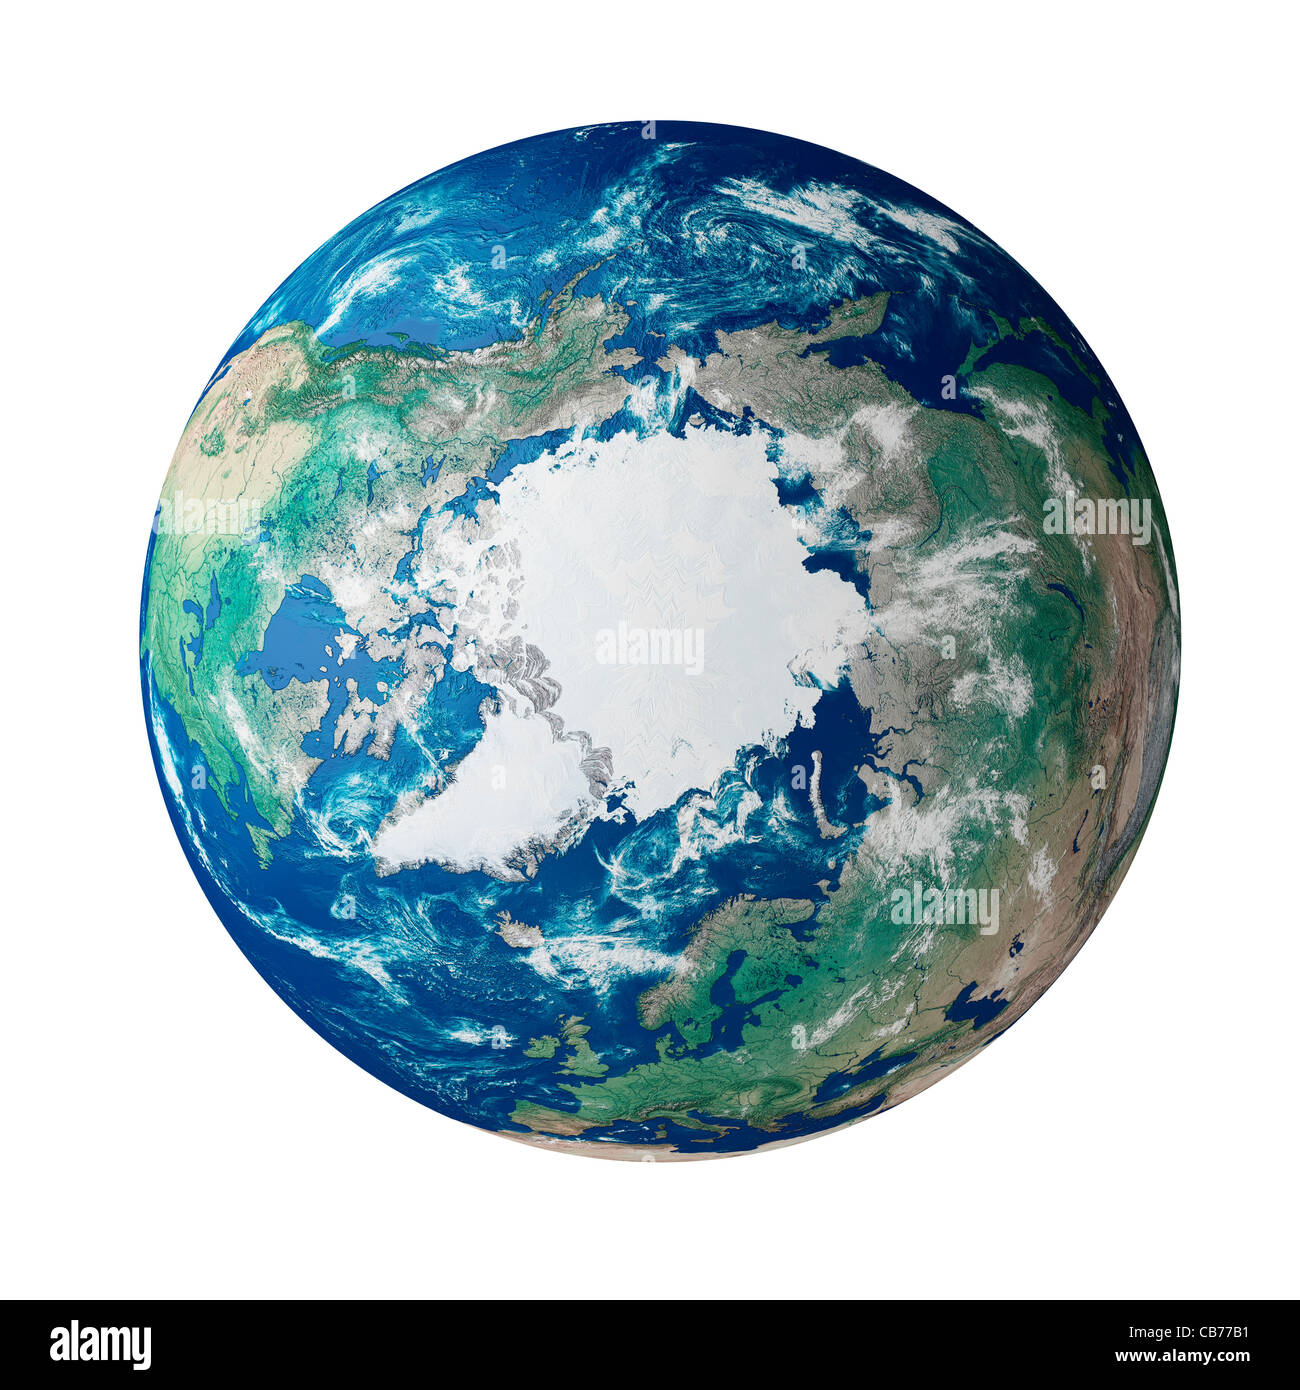 Globe showing the Arctic region on planet earth Stock Photo